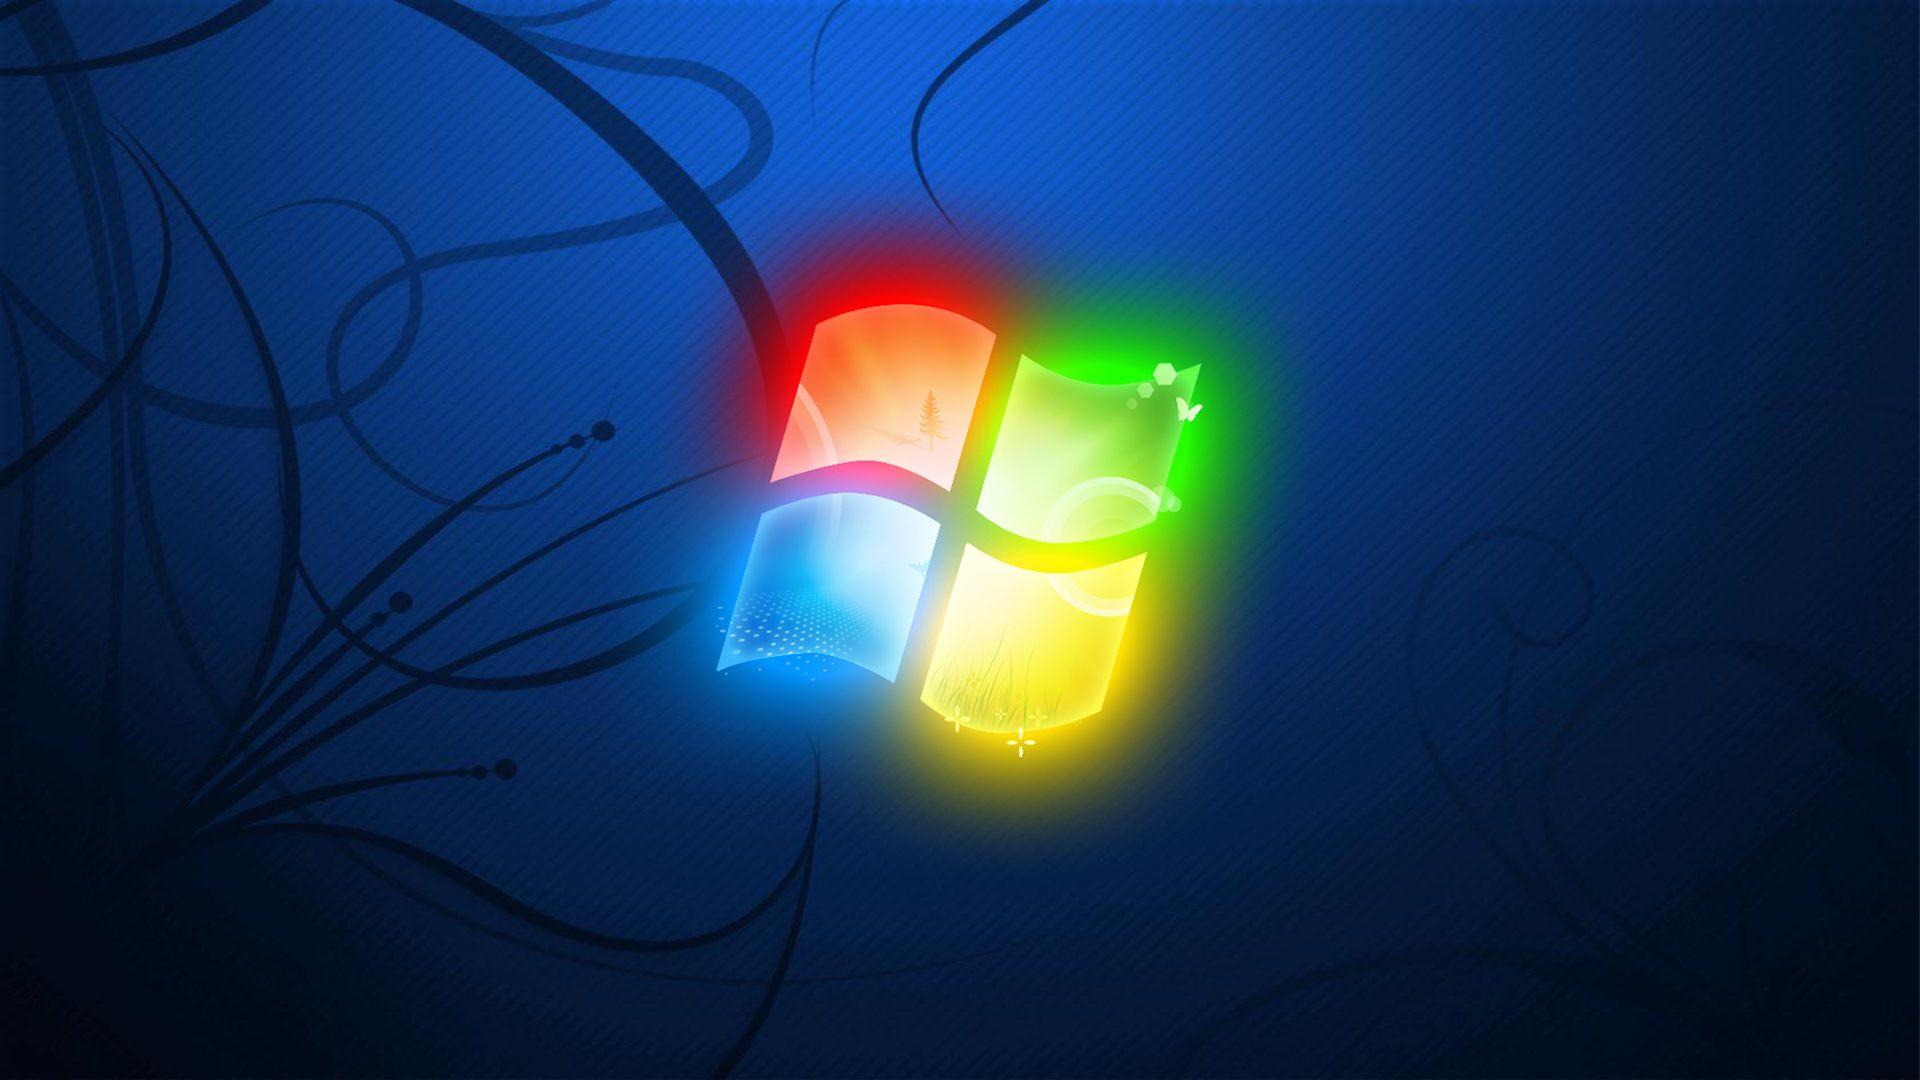 HD Wallpaper For Windows Free Download